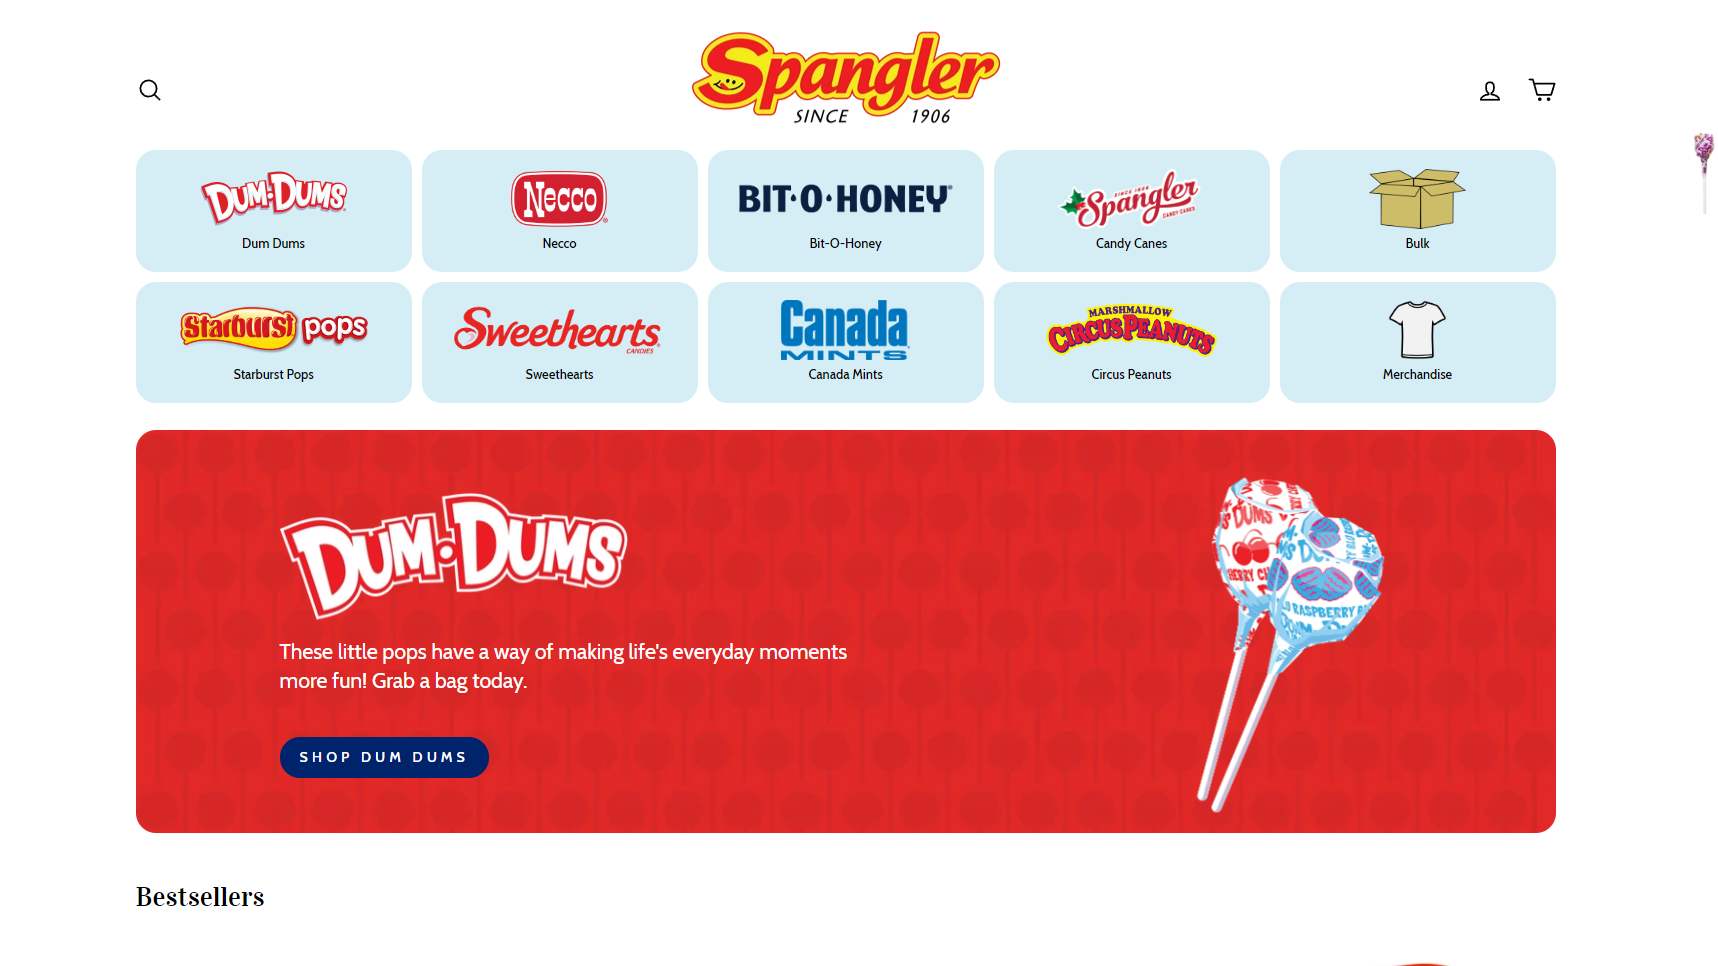 Spangler Candy - Candy Manufacturer